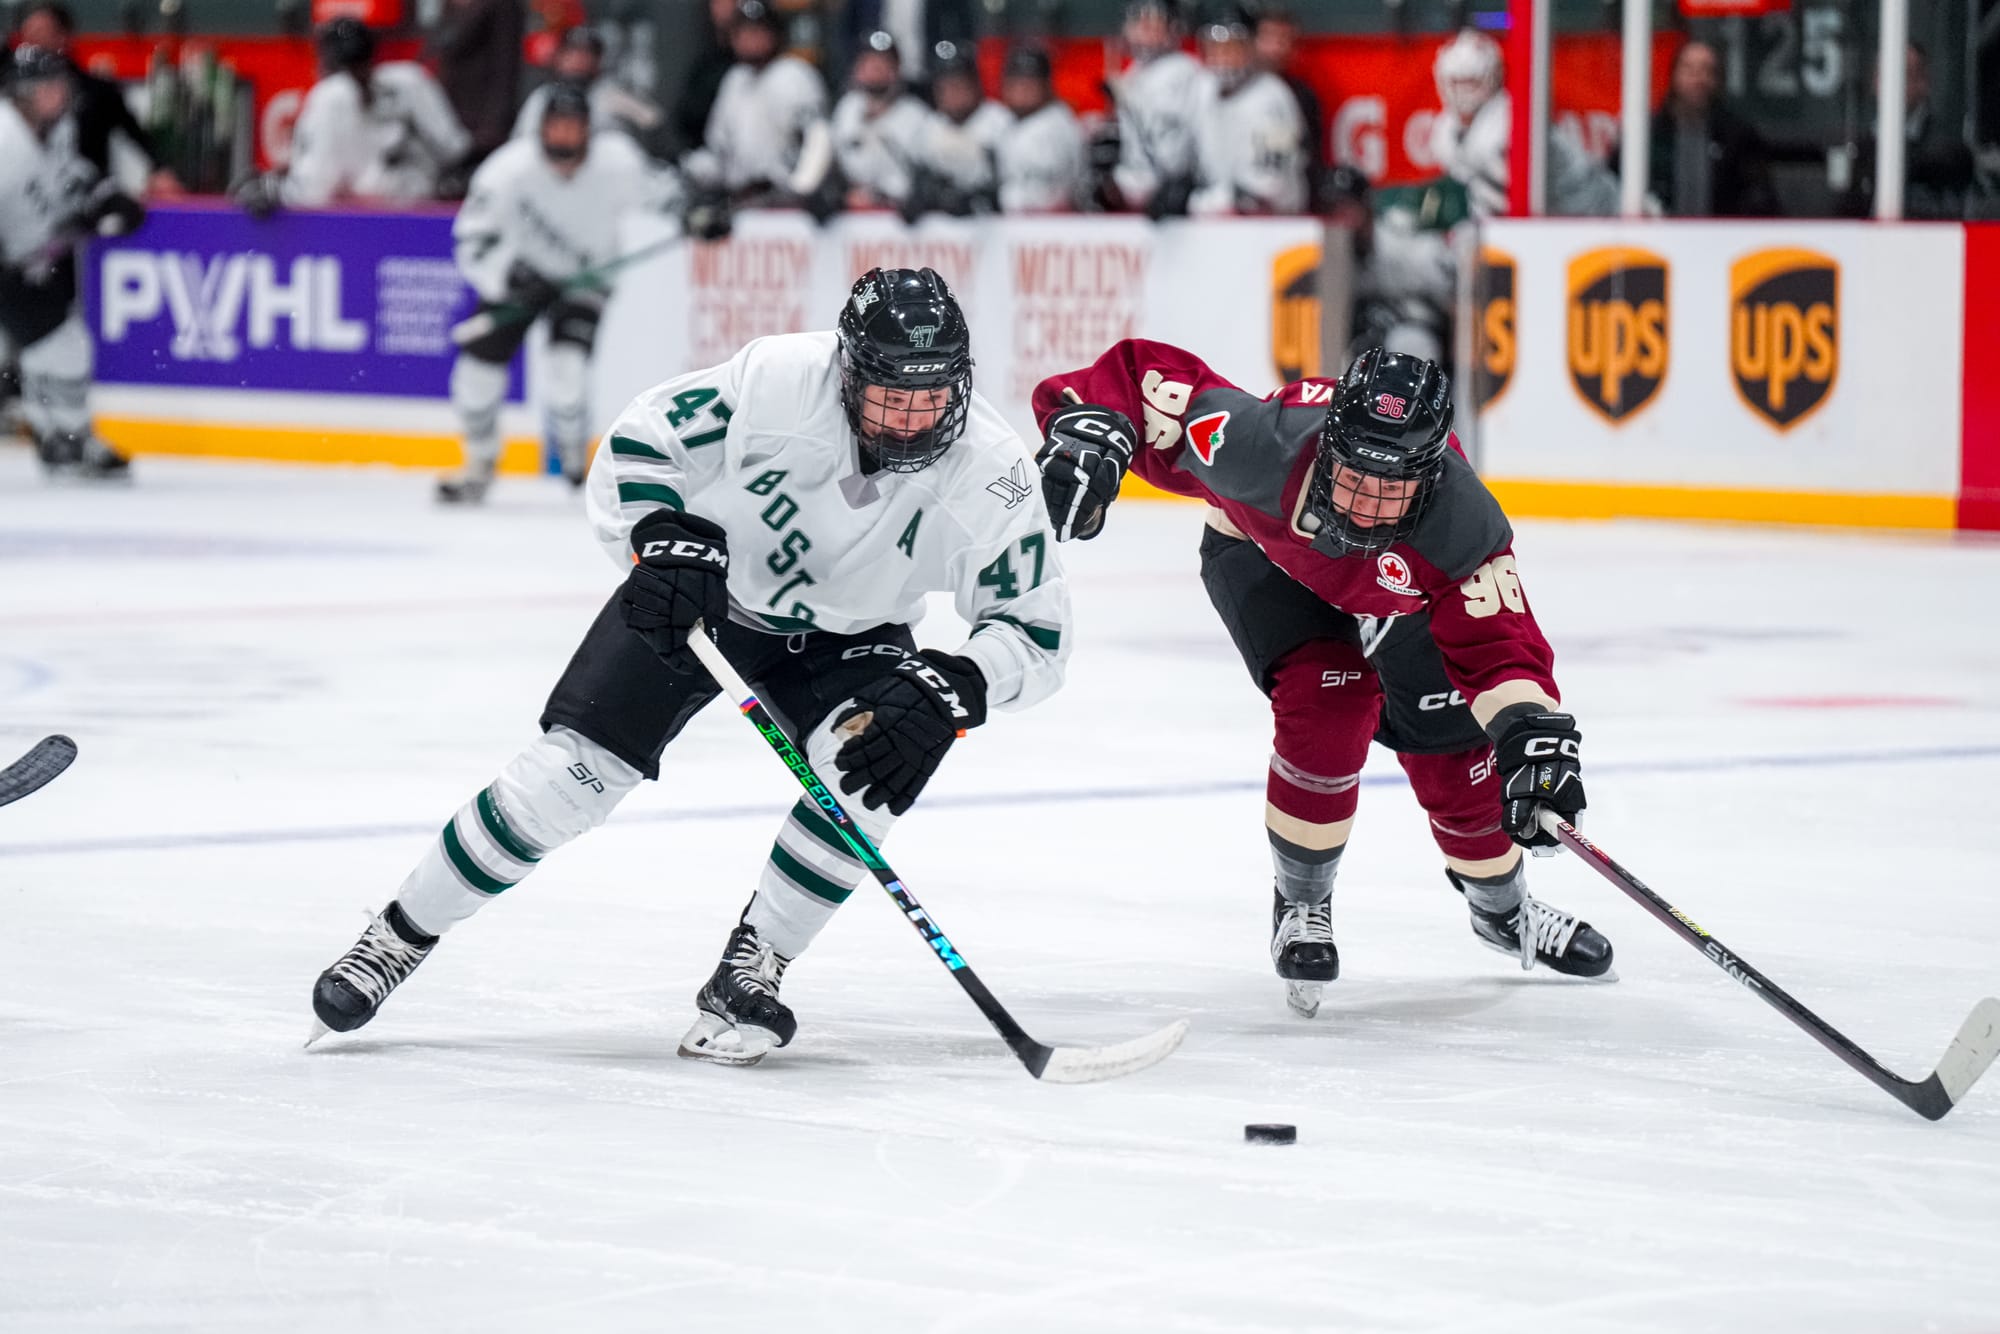 Jamie Lee Rattray, in a white away uniform protects the puck from Montréal's Dominika Lásková, wearing a maroon home uniform.